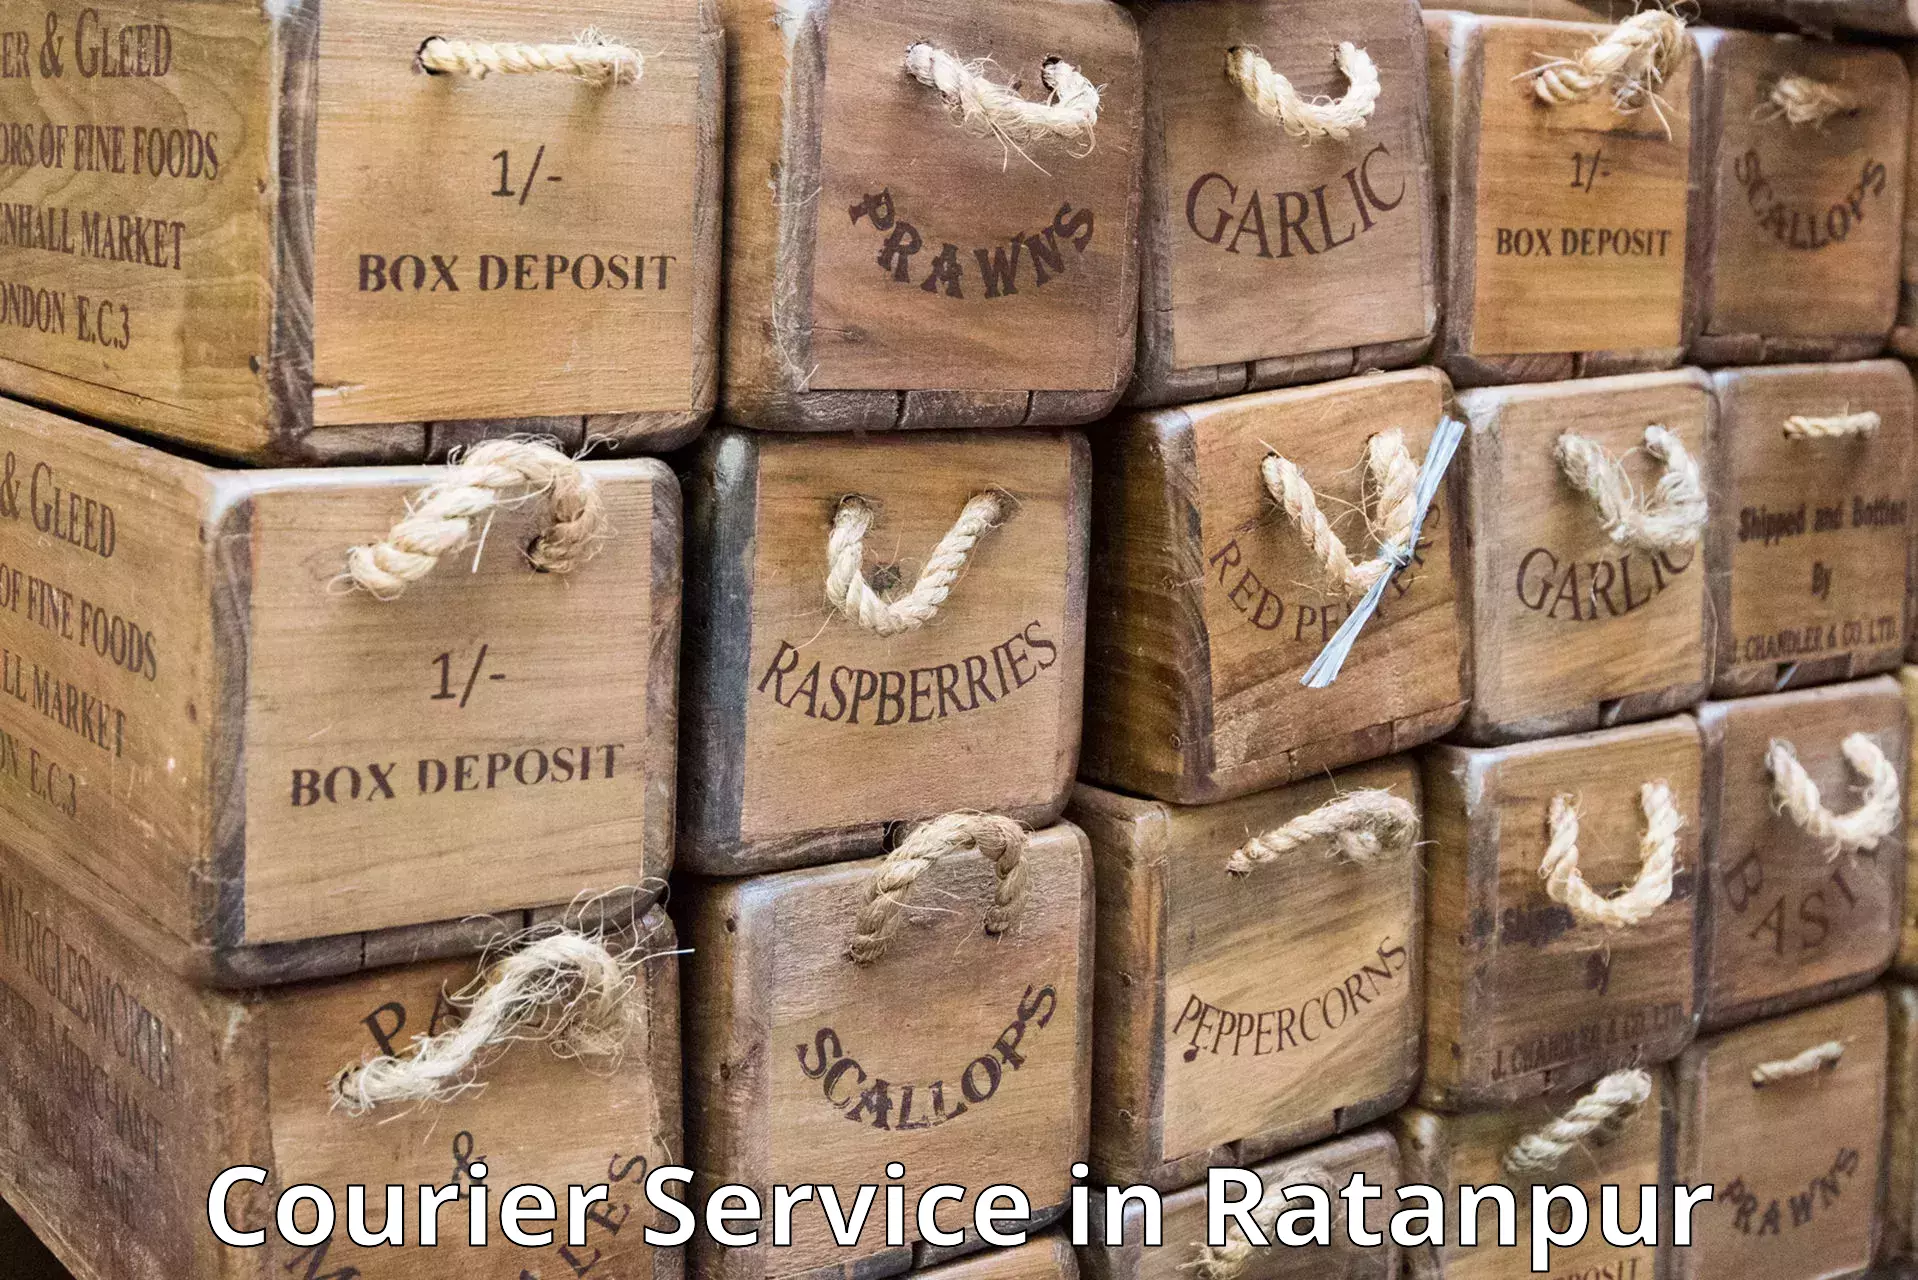 Efficient parcel tracking in Ratanpur